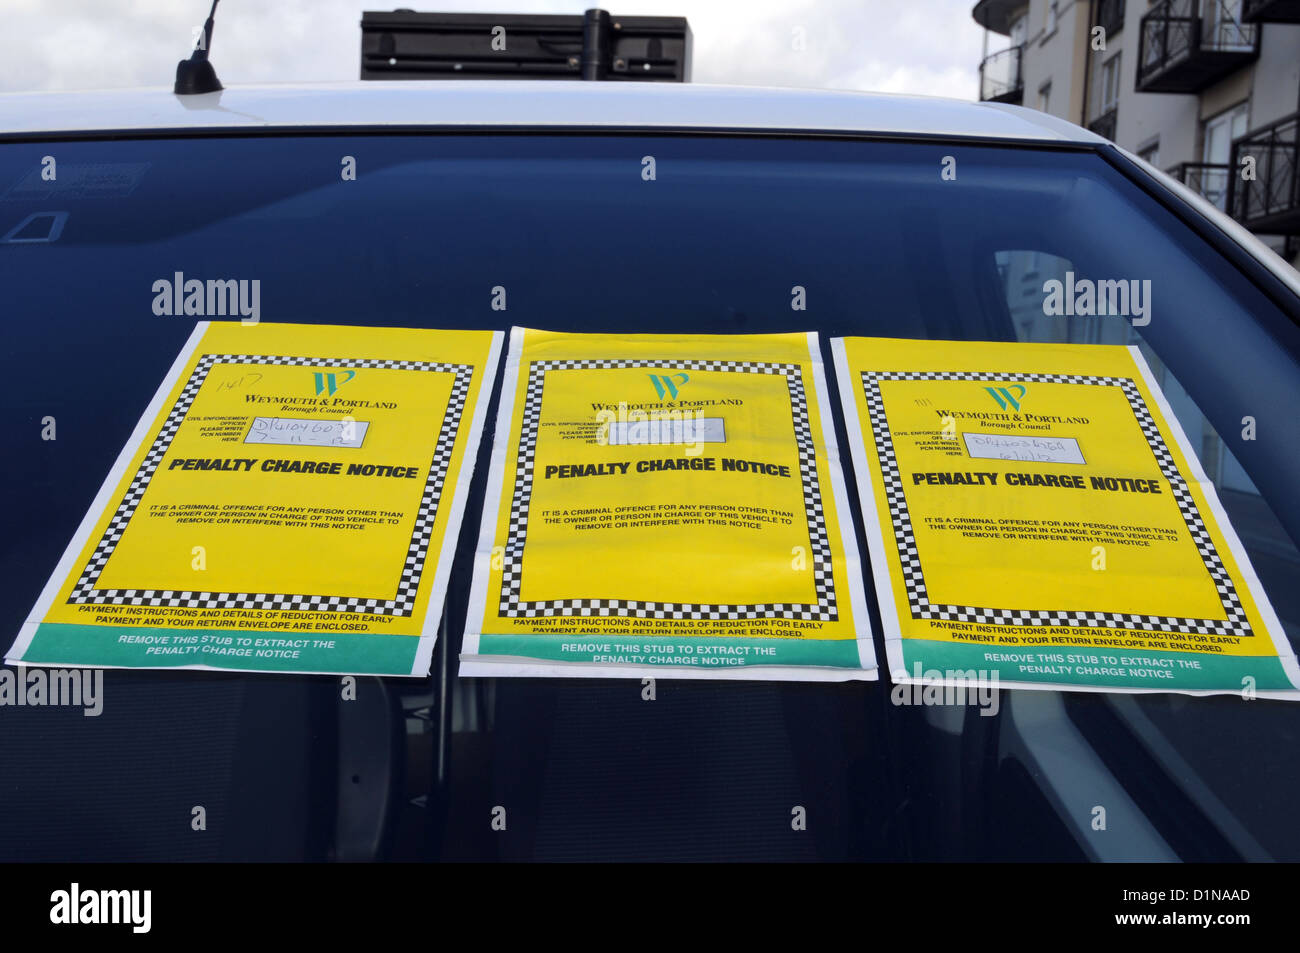 "parking tickets" "Parking ticket" "Parking charge notice" "Parking fine" Stock Photo